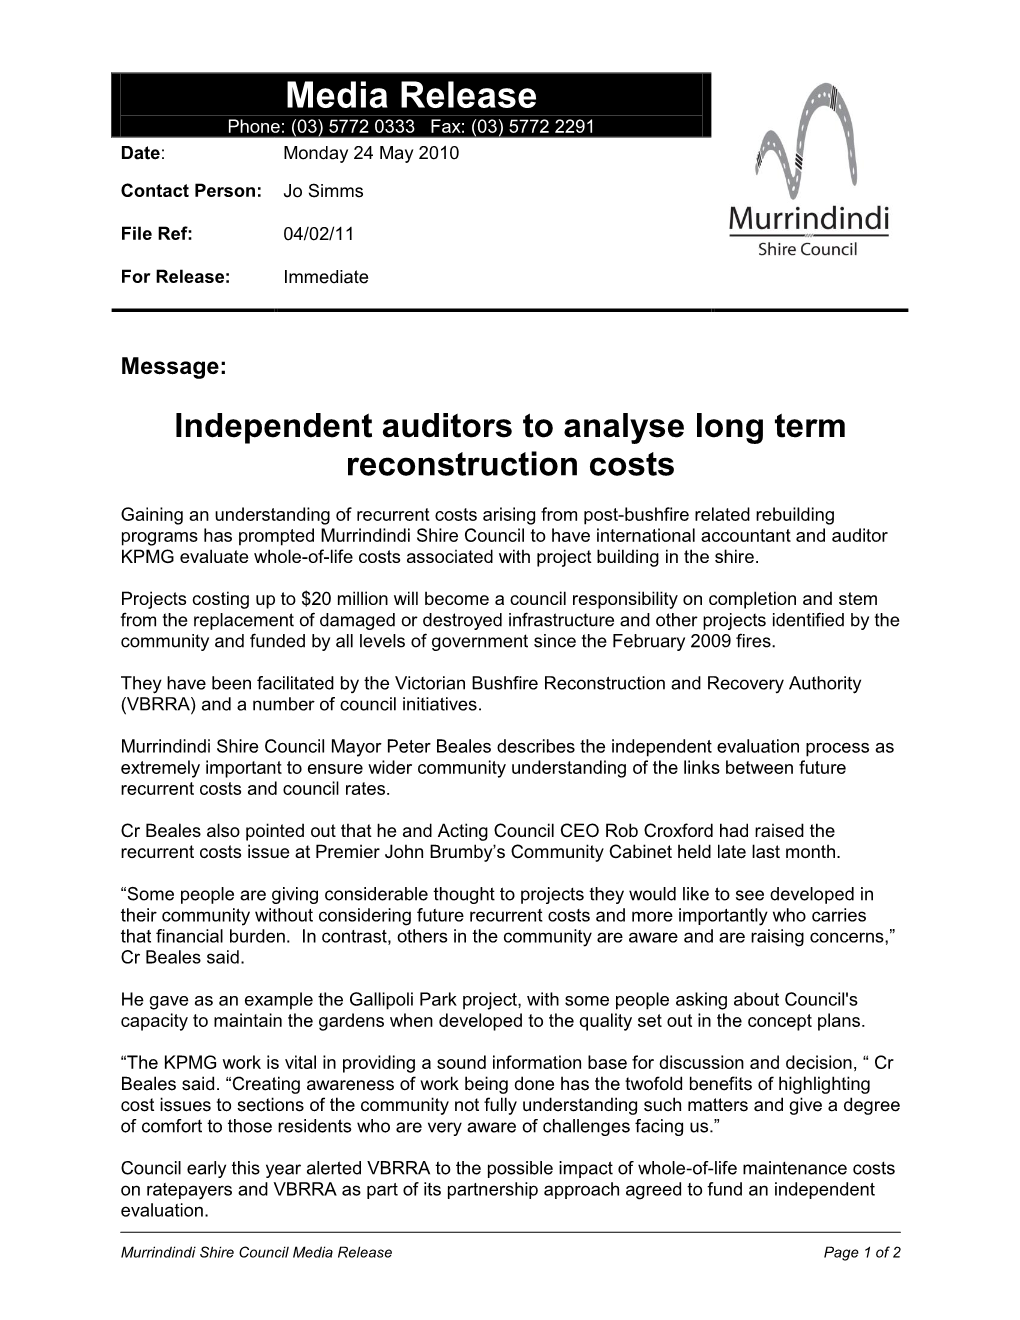 Media Release Phone: (03) 5772 0333 Fax: (03) 5772 2291 Date: Monday 24 May 2010